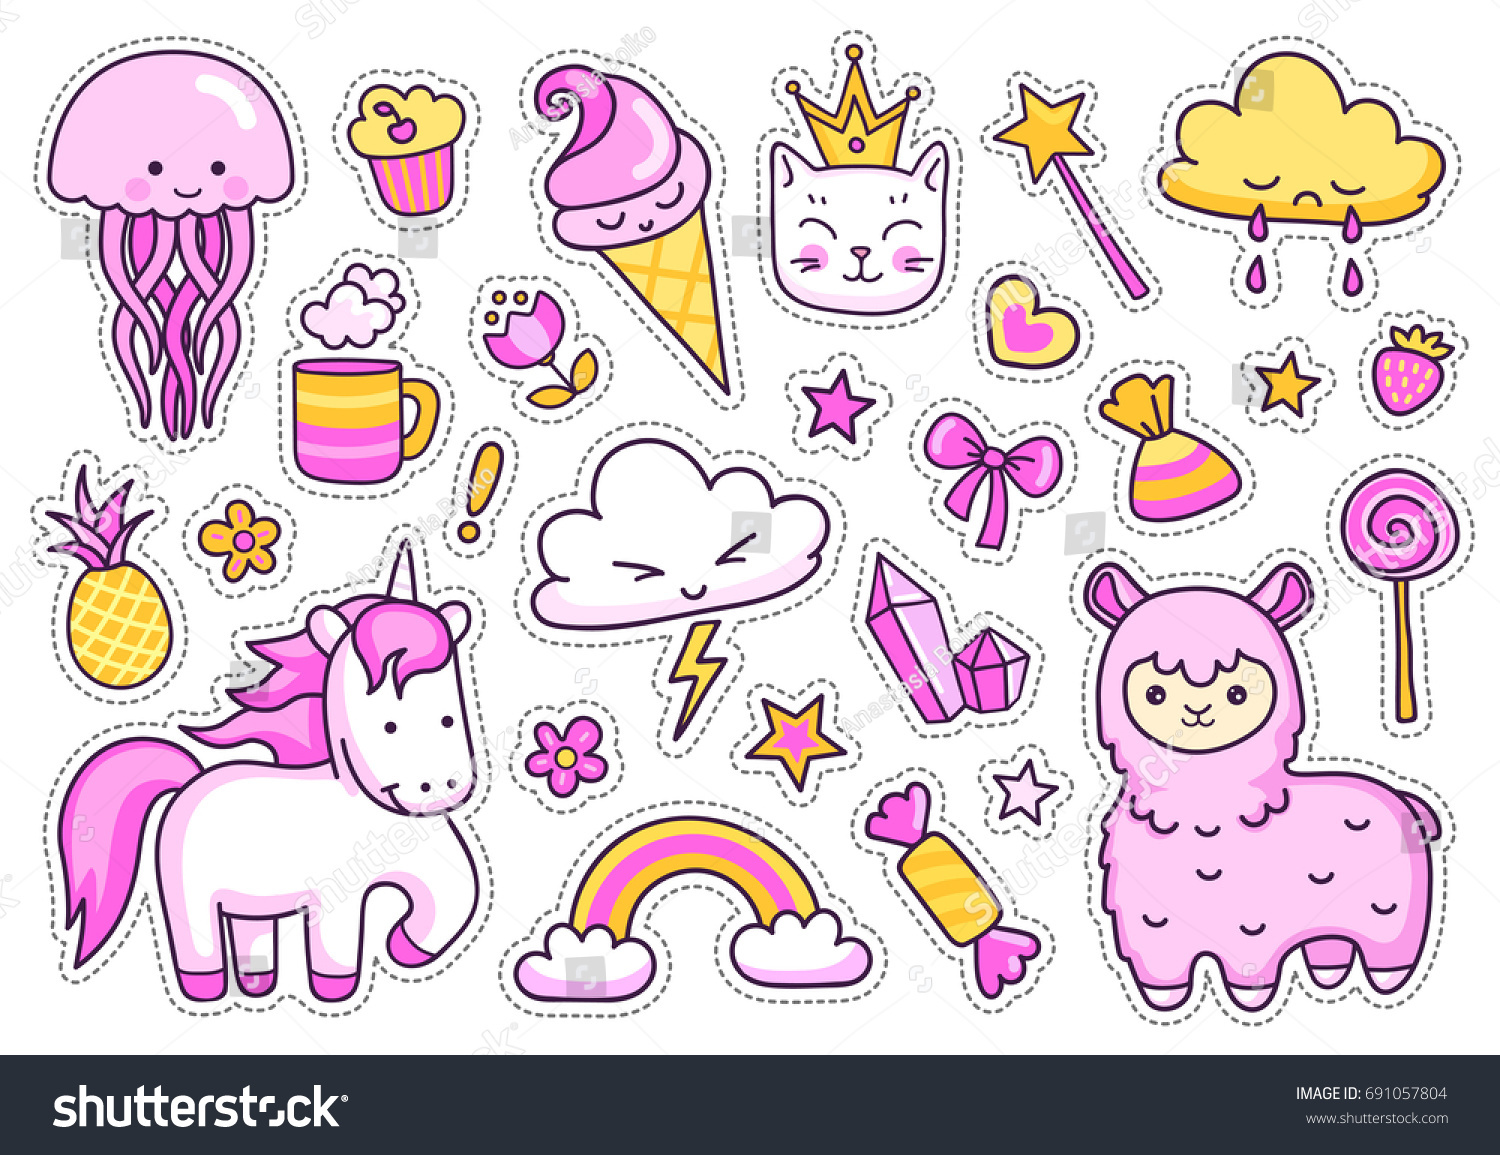 Magic unicorn, alpaca, kitten, jellyfish, cute animals, sweets, rainbow, clouds, stars, hearts. Set of stickers, patches, badges, pins, prints for kids. Doodle style. Vector isolated illustration. #691057804